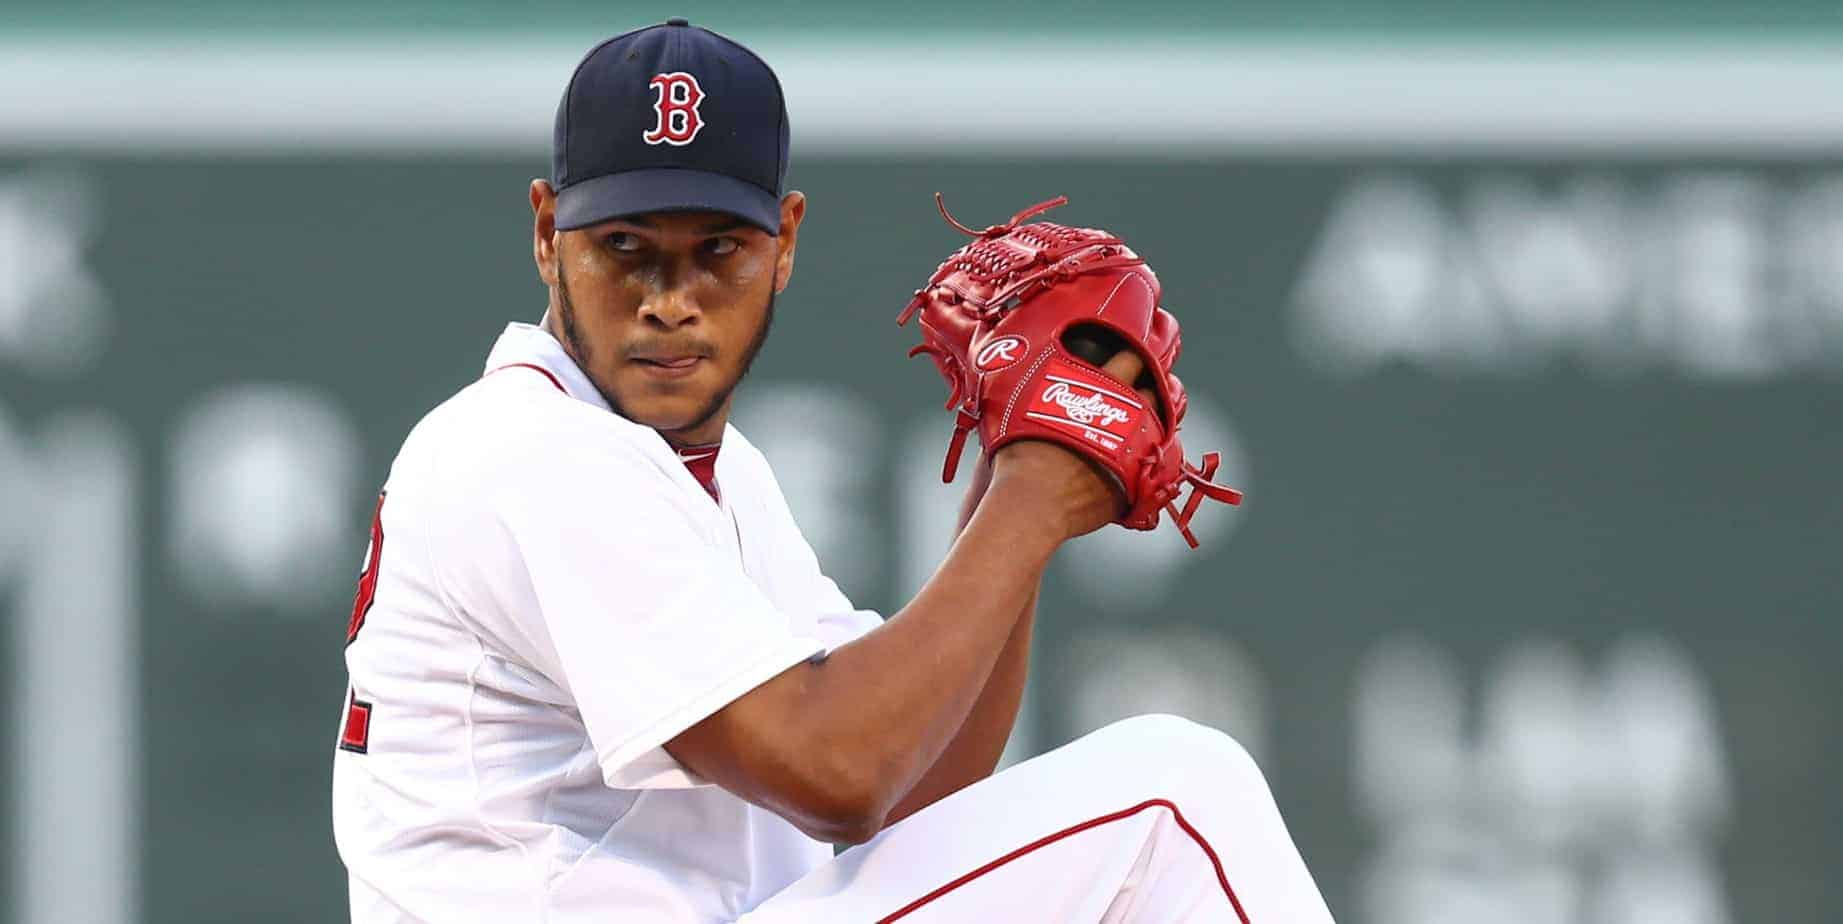 Eduardo Rodriguez apologized for mocking Carlos Correa and his celebration after Alex Cora clearly wasn't a fan of the move on Monday night